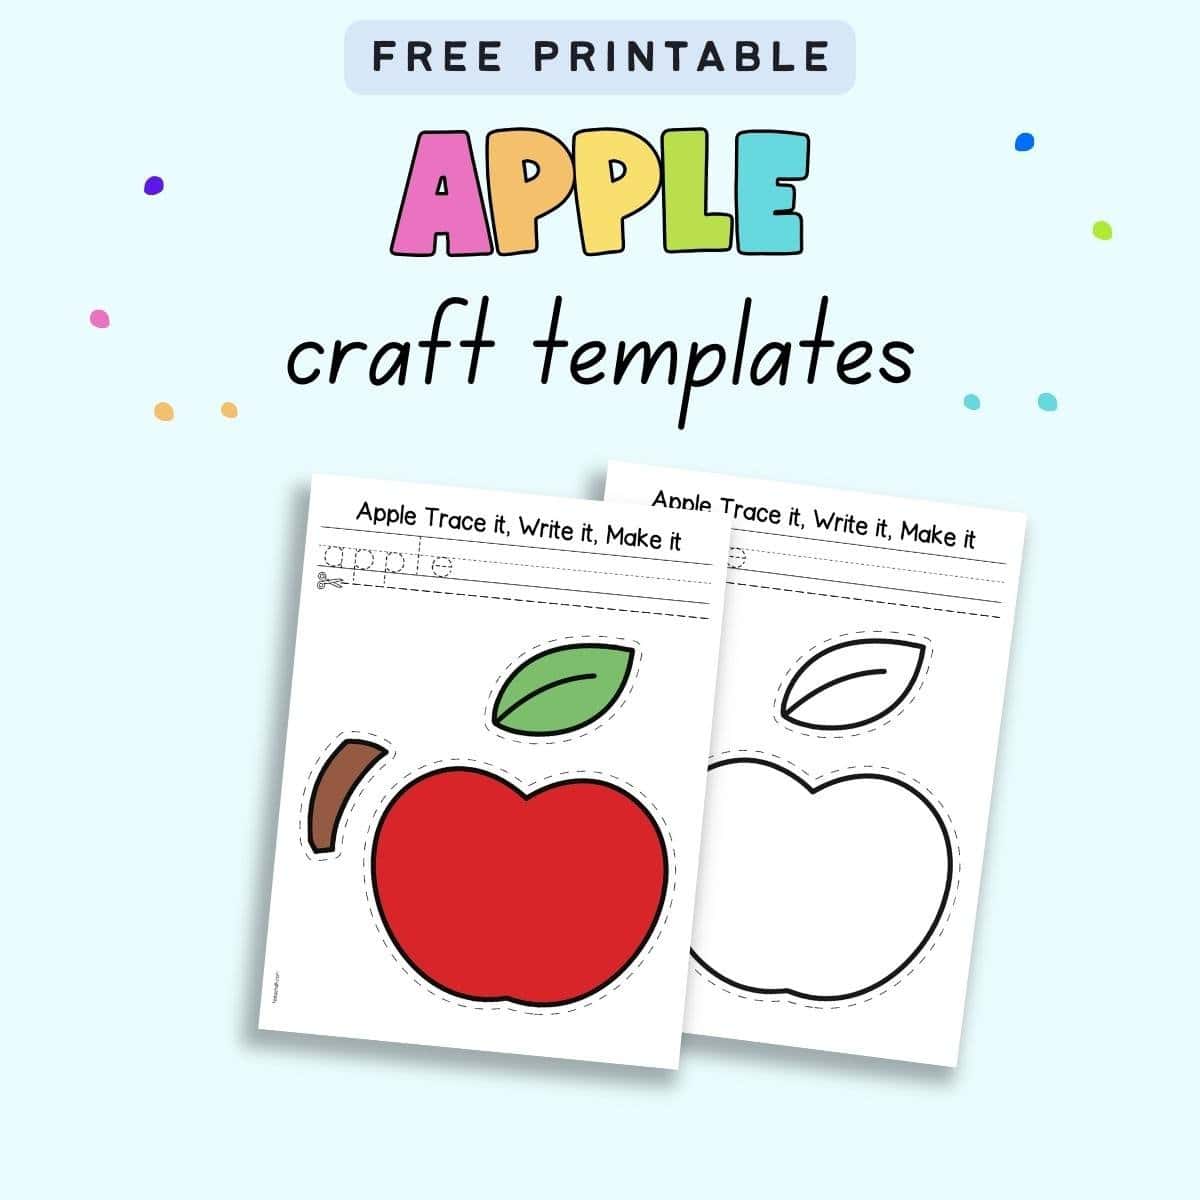 Text "free printable apple craft templates" with a preview of two pages of printable apple cut and paste craft. One is color and the other black and white.